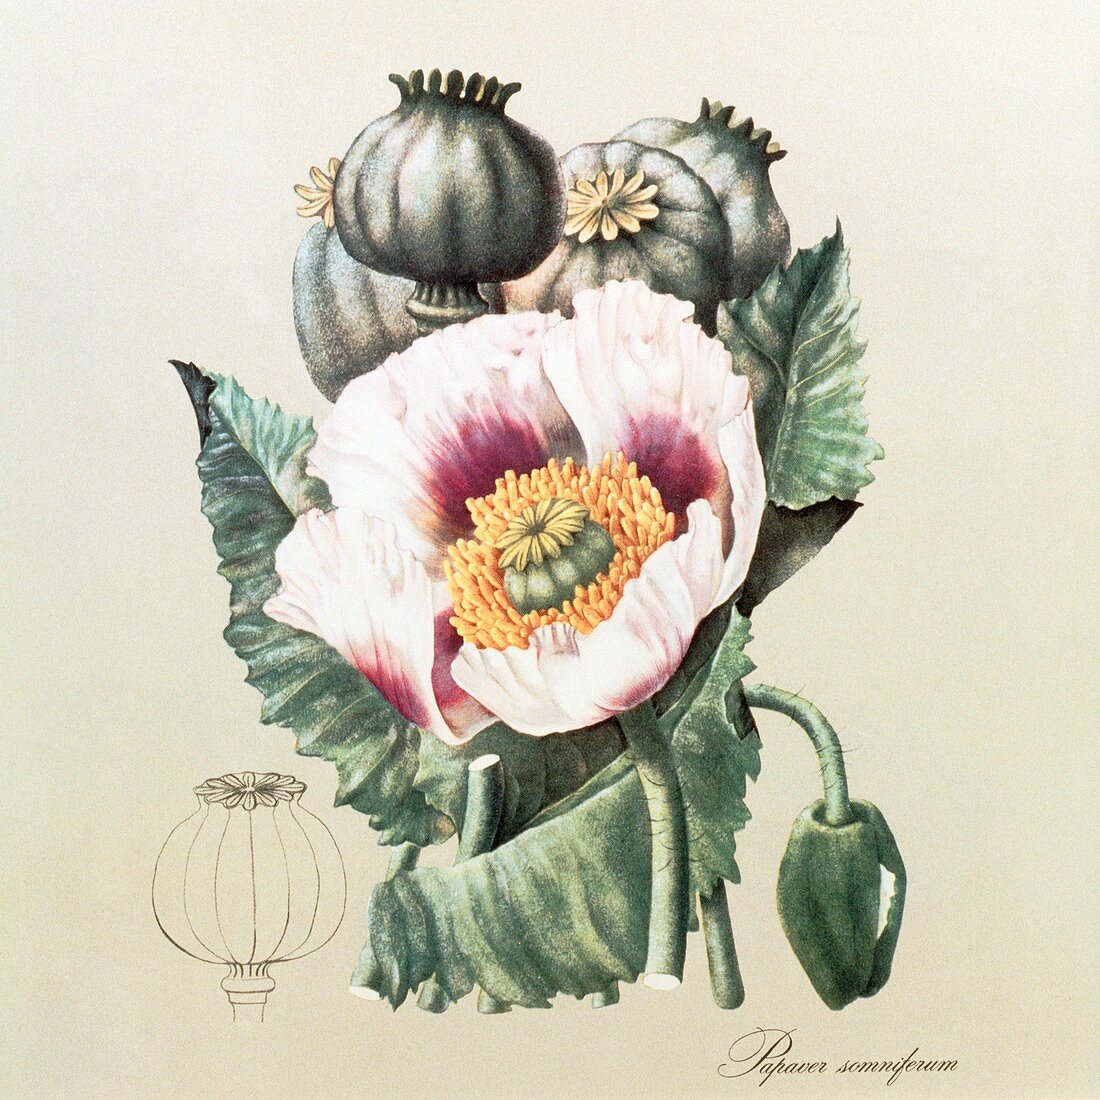 Lithograph of the opium poppy